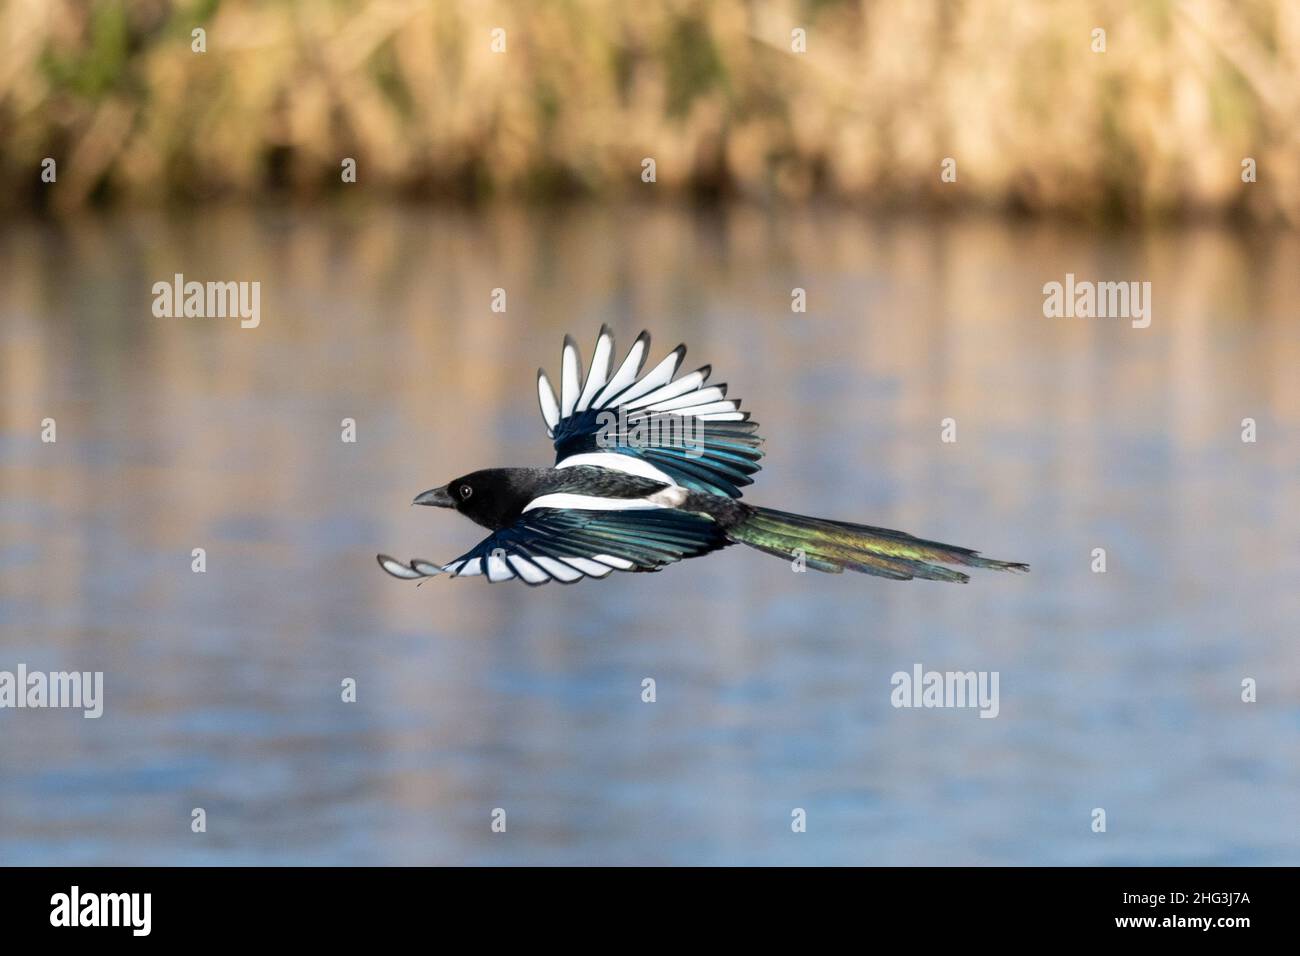 Magpie (Pica pica) in flight, bird with black and white plumage flying over wetland pond, UK, during winter Stock Photo